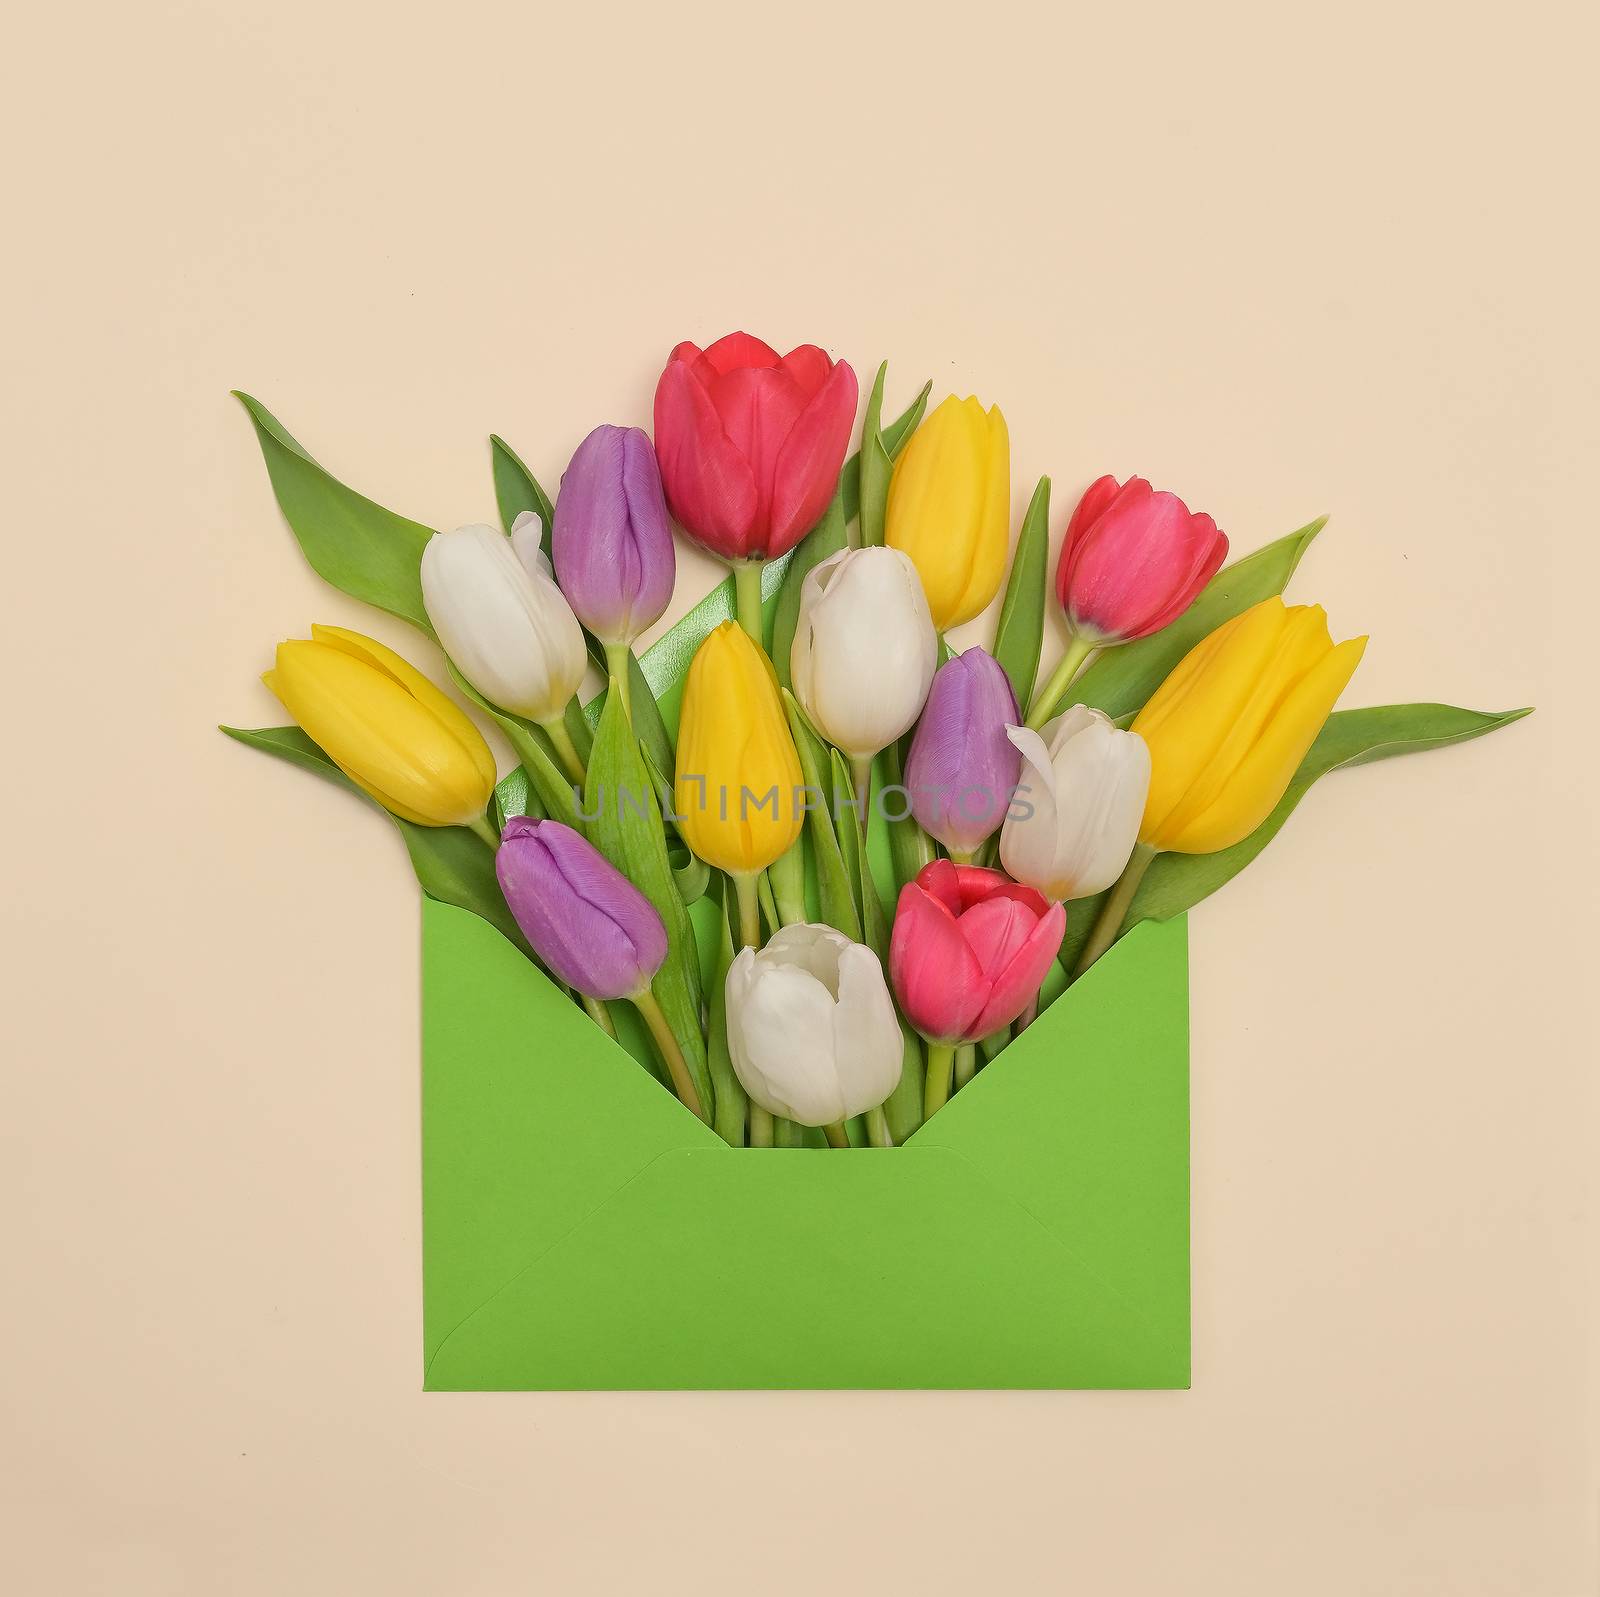 Conceptual Tulips Flowers And Envelope by mady70